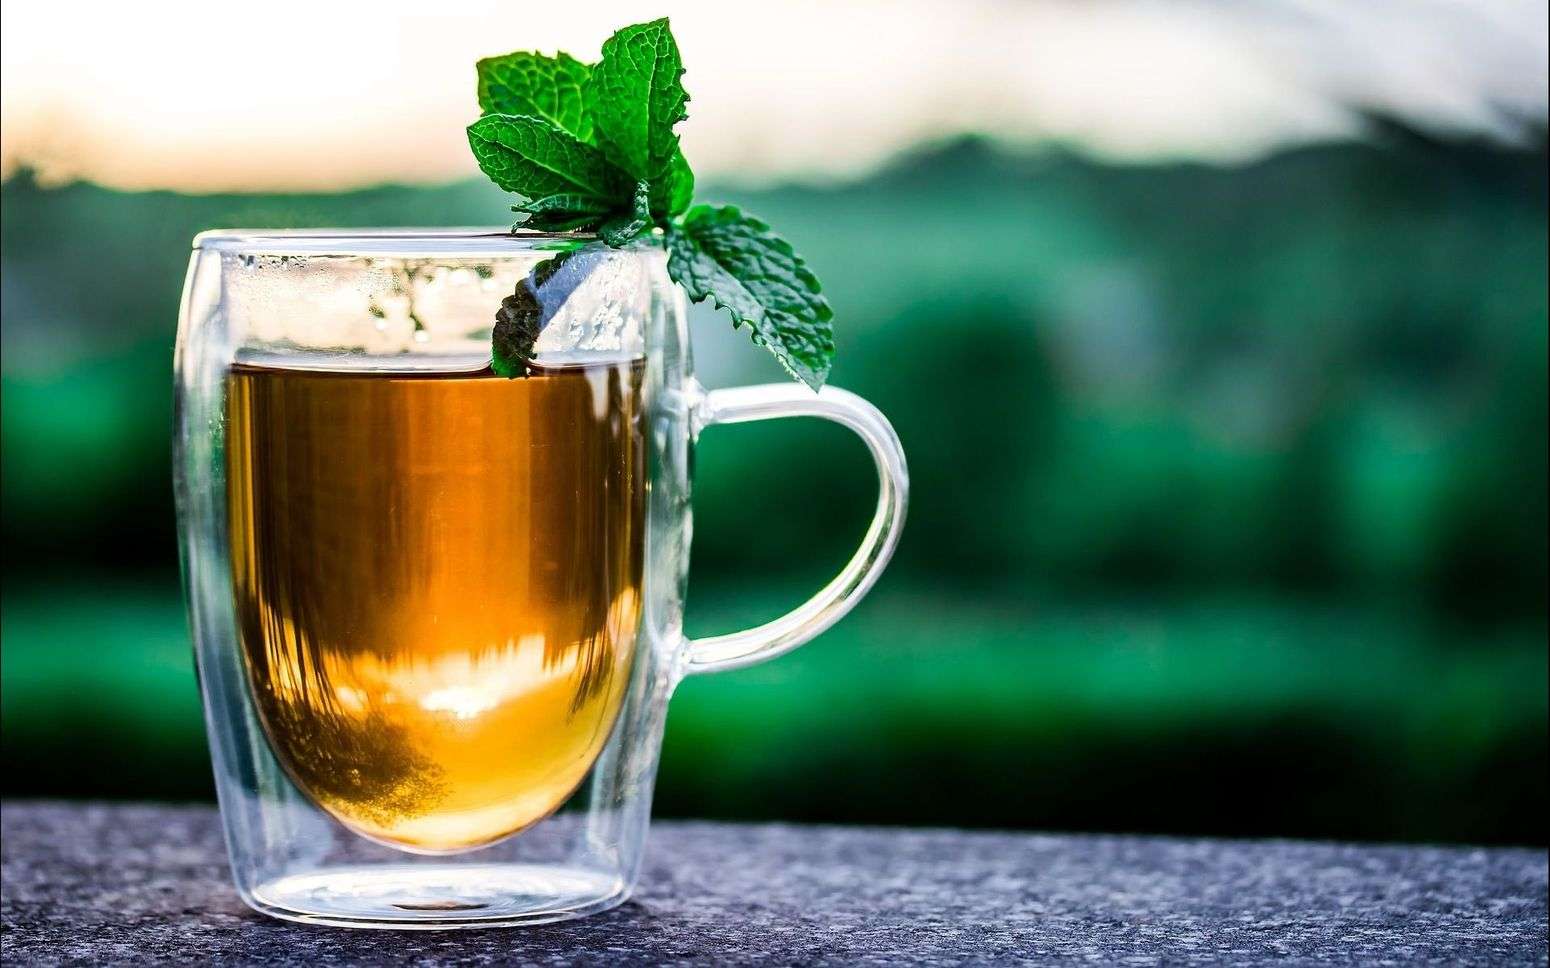 6 Herbal Teas That Help With Insomnia, Anxiety, and Digestion